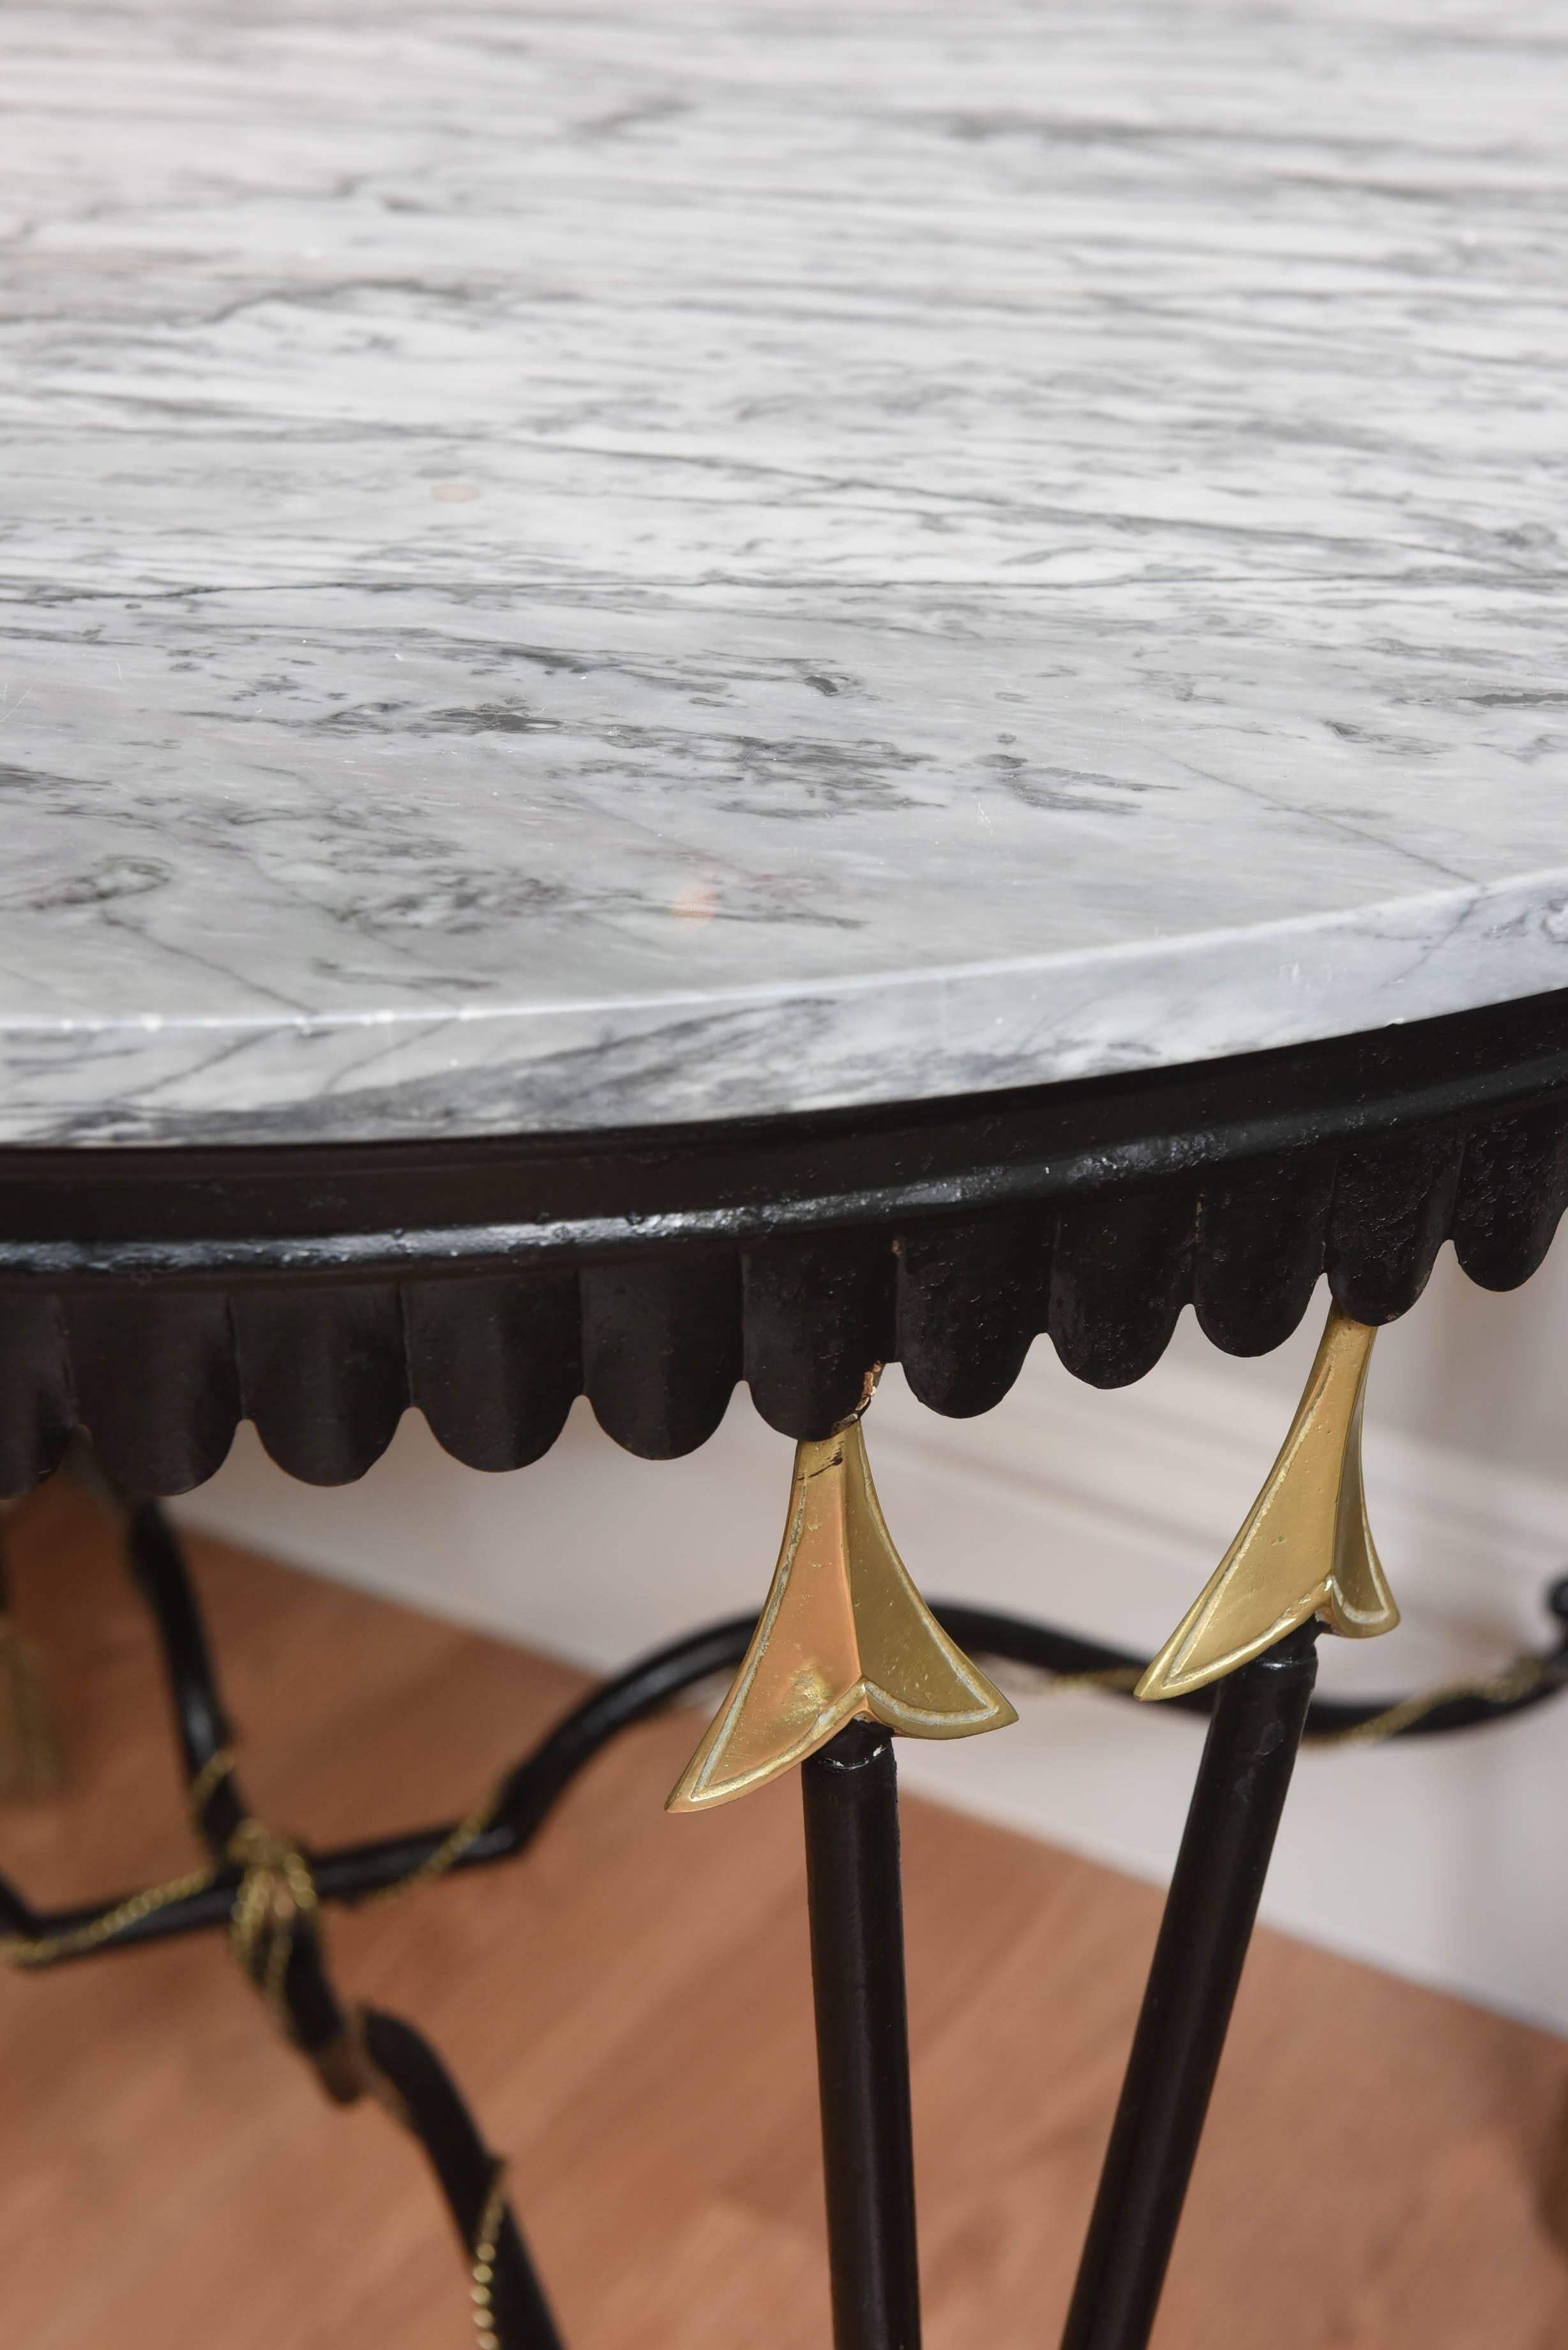 Stunning wrought iron and brass neoclassical center table with crossed arrow legs. Finished with gilded arrow heads and feathers. Original marble top.